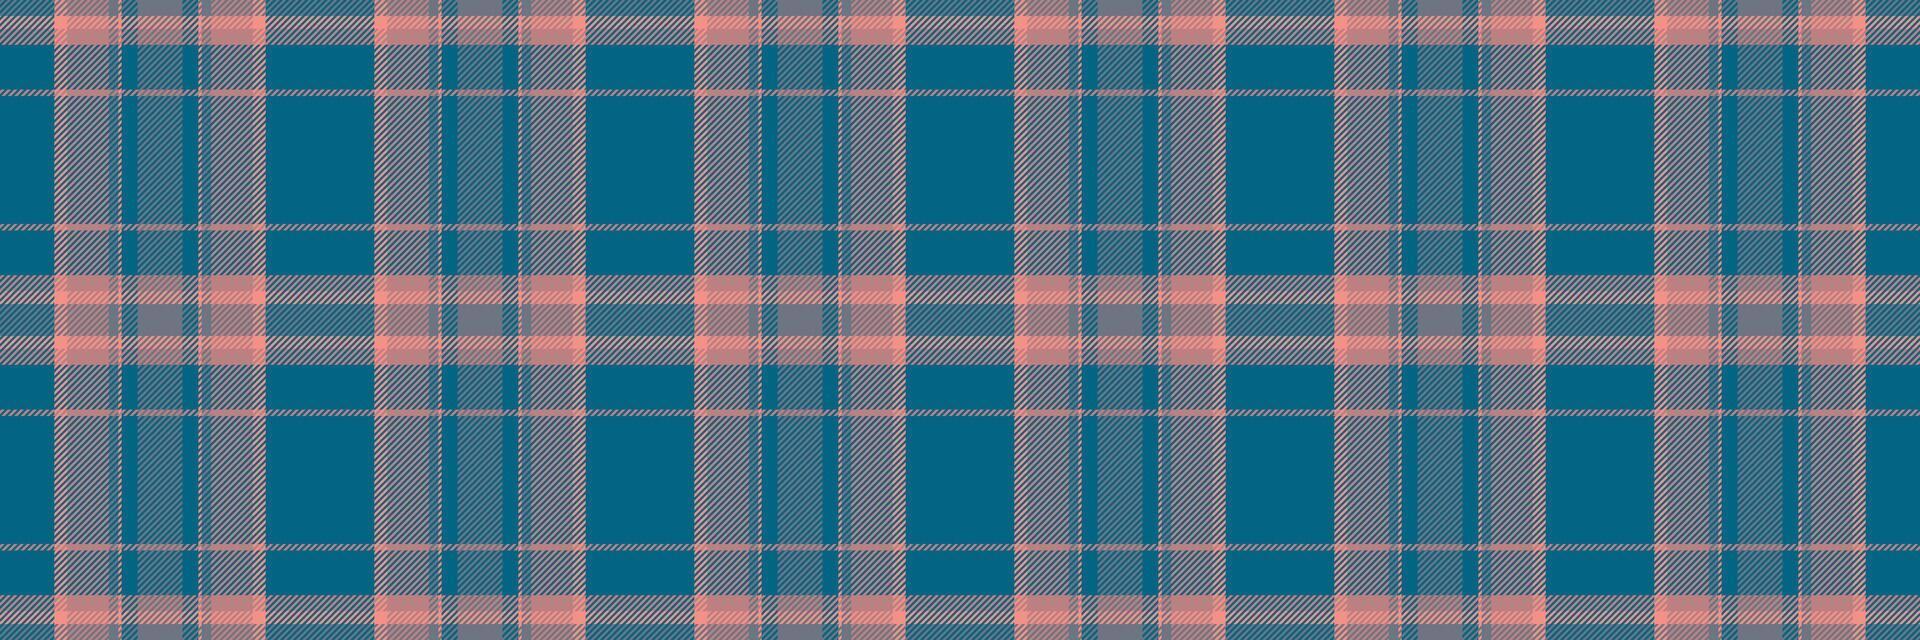 Hobby fabric tartan vector, horizon plaid seamless texture. Magazine check background pattern textile in red and cyan colors. vector